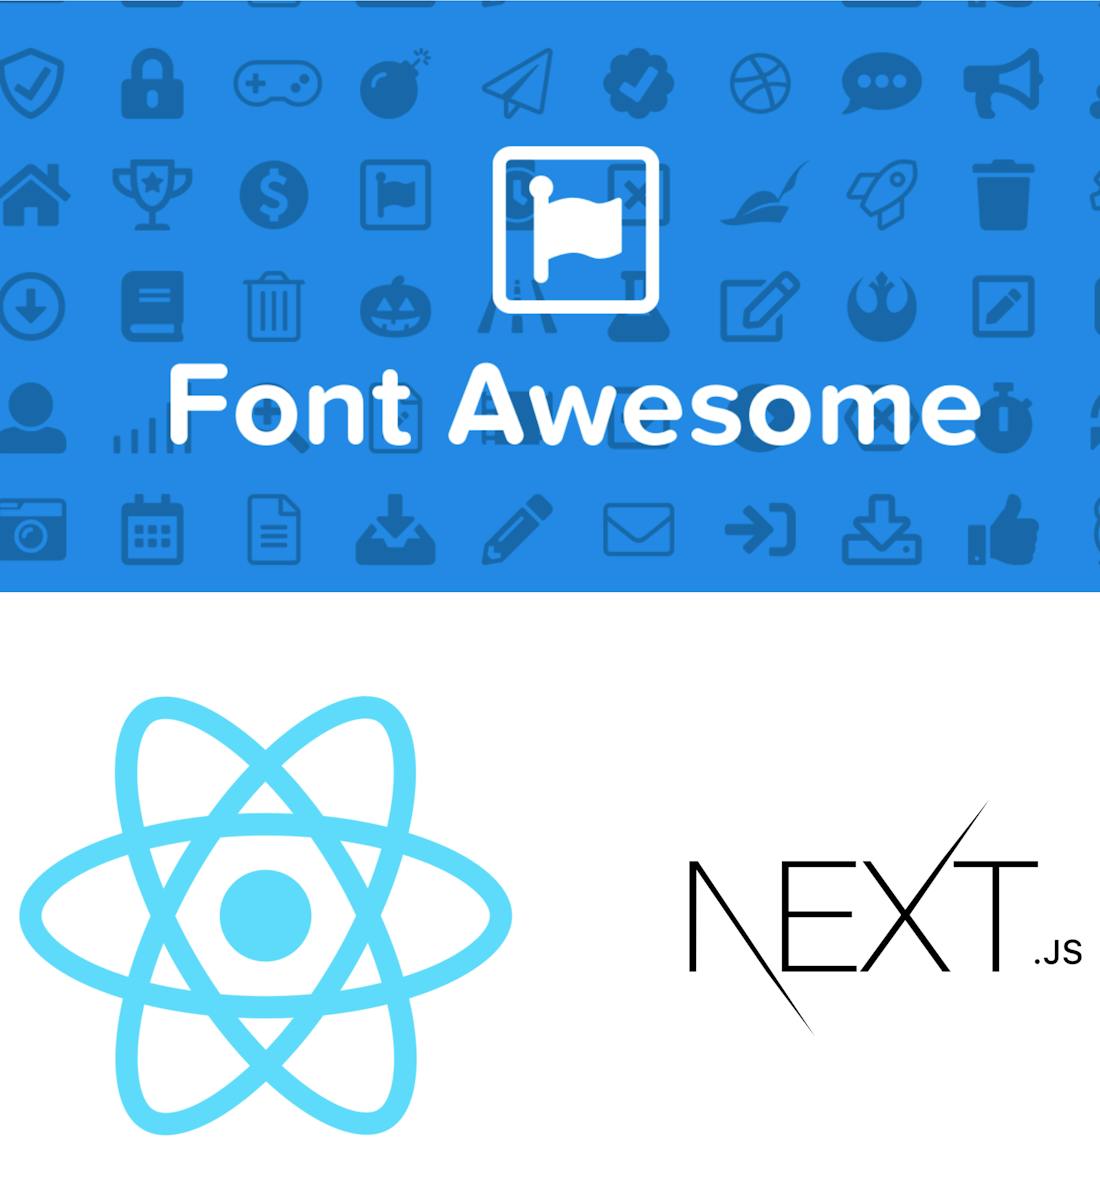 Integrate Font Awesome with React and Next Js Applications